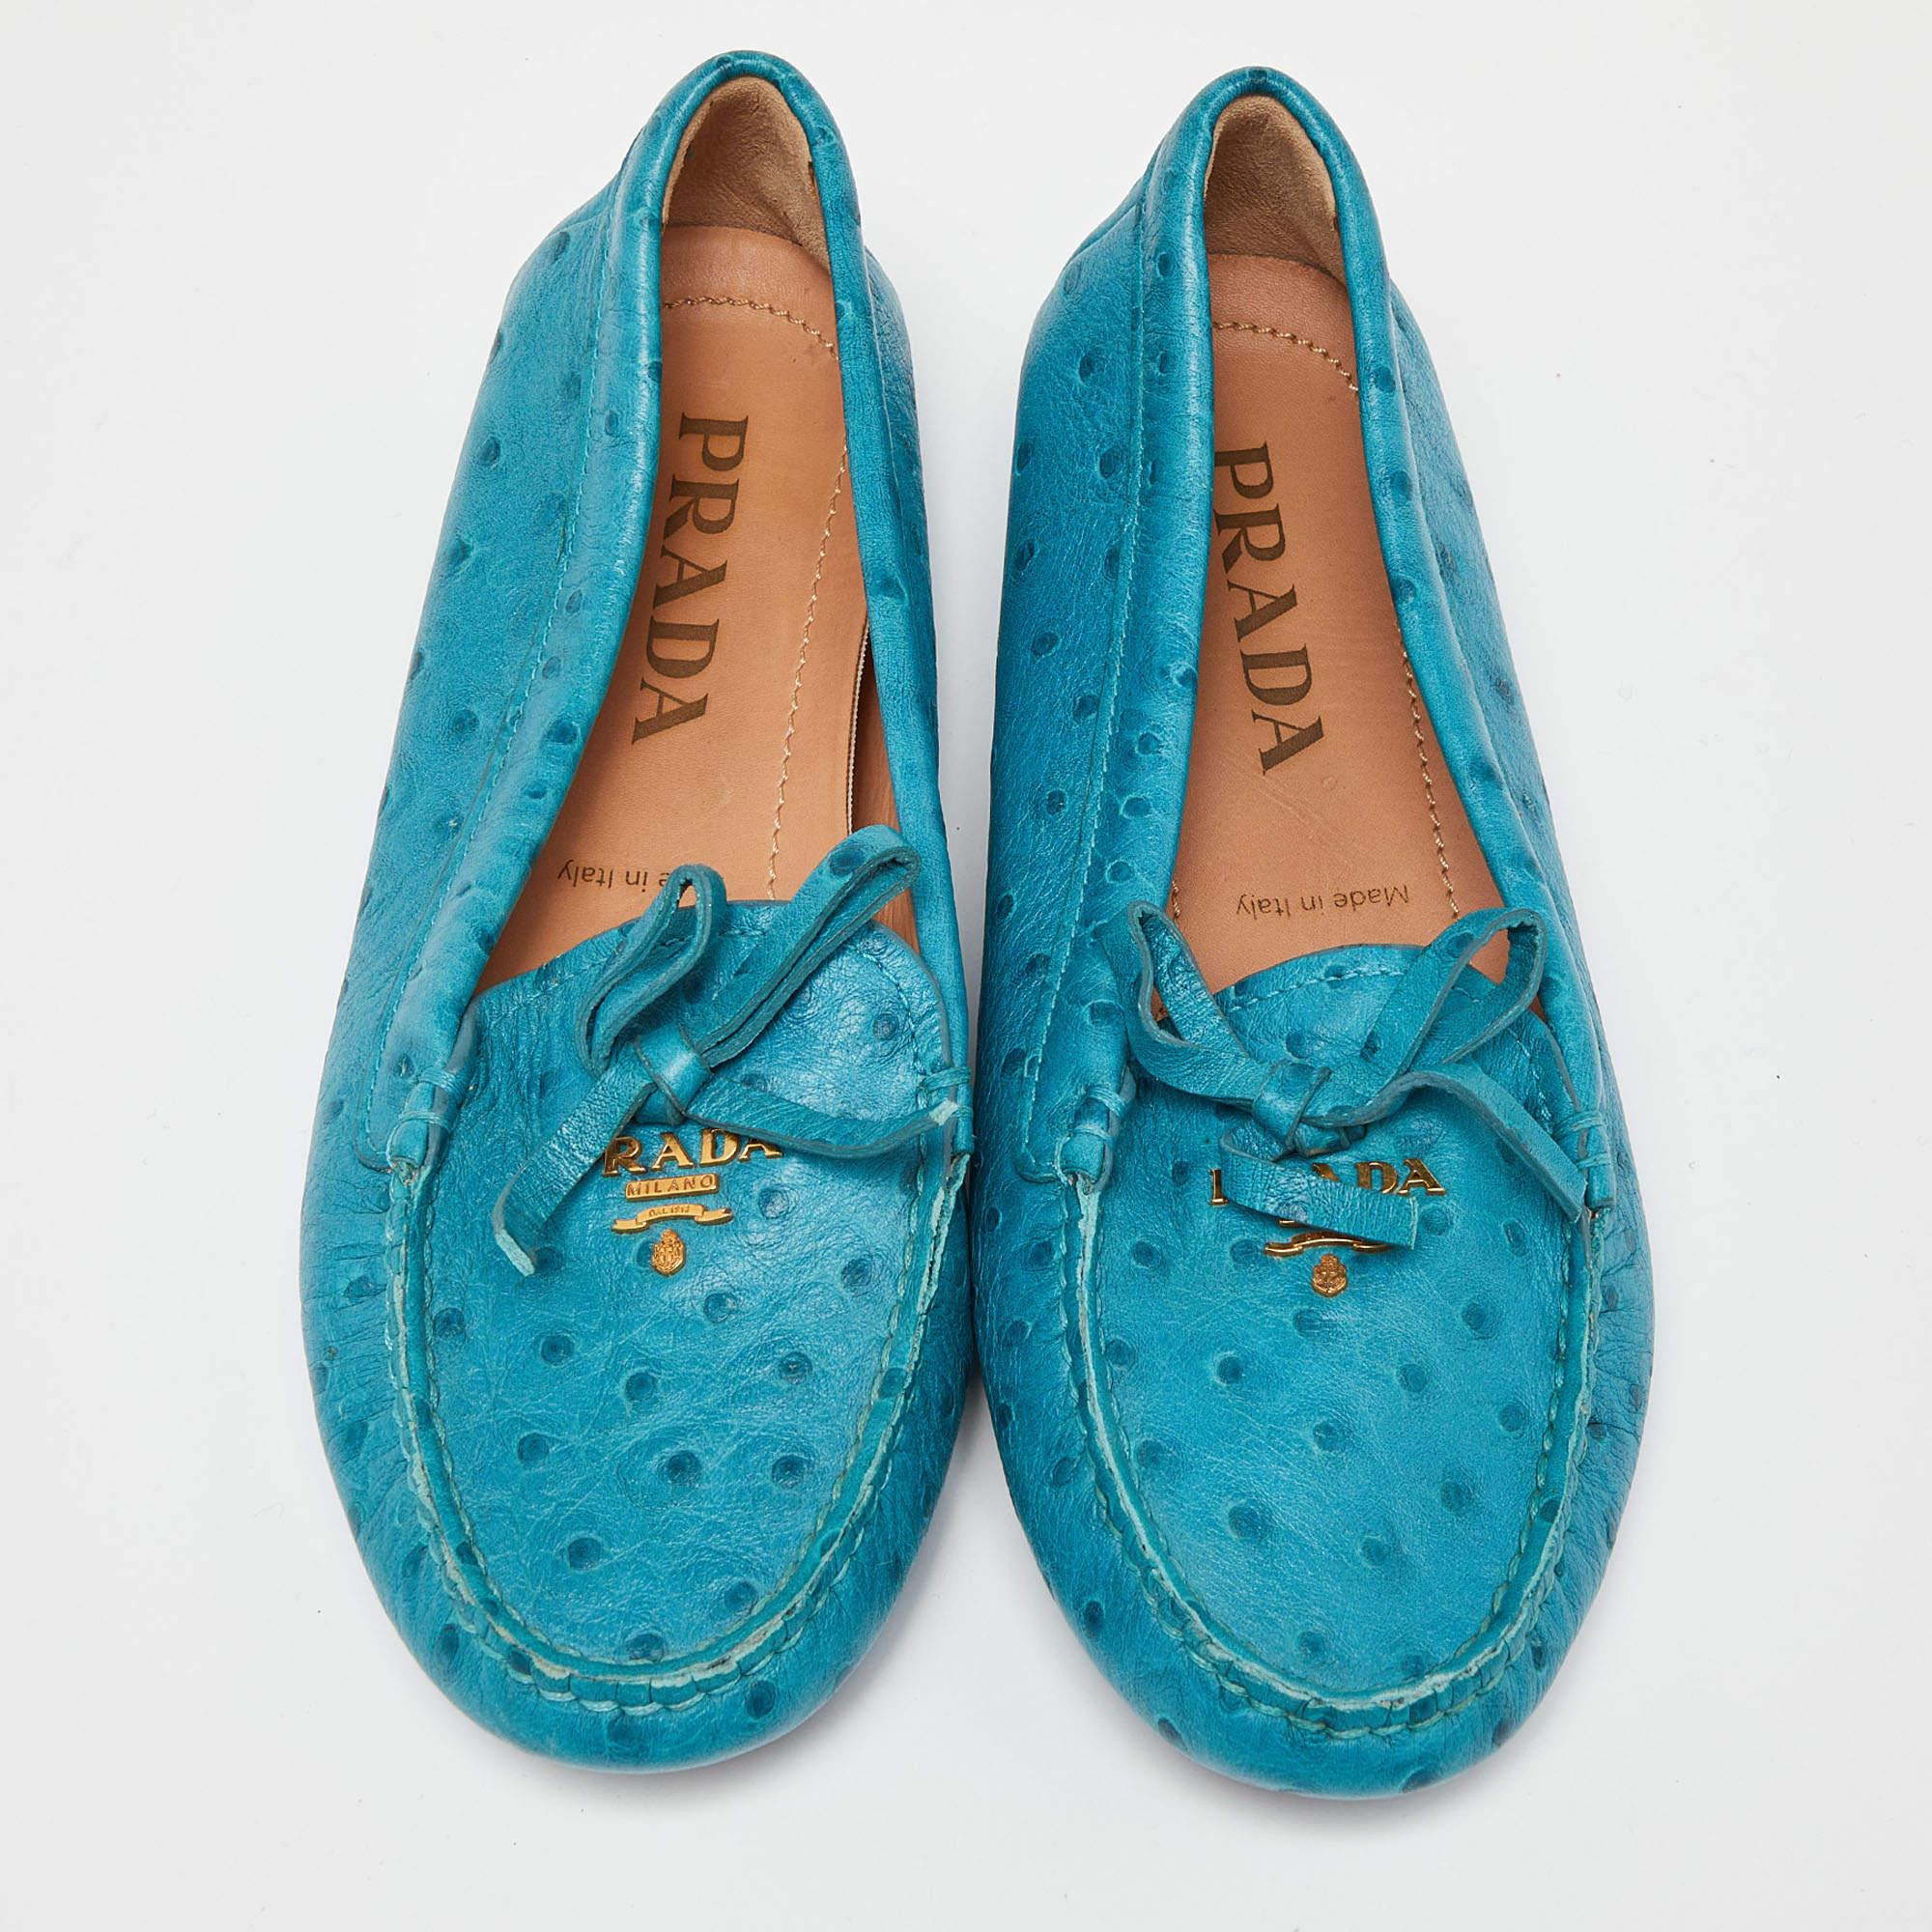 Prada Blue Embossed Ostrich Bow Slip On Loafers Size 36 In Excellent Condition For Sale In Dubai, Al Qouz 2